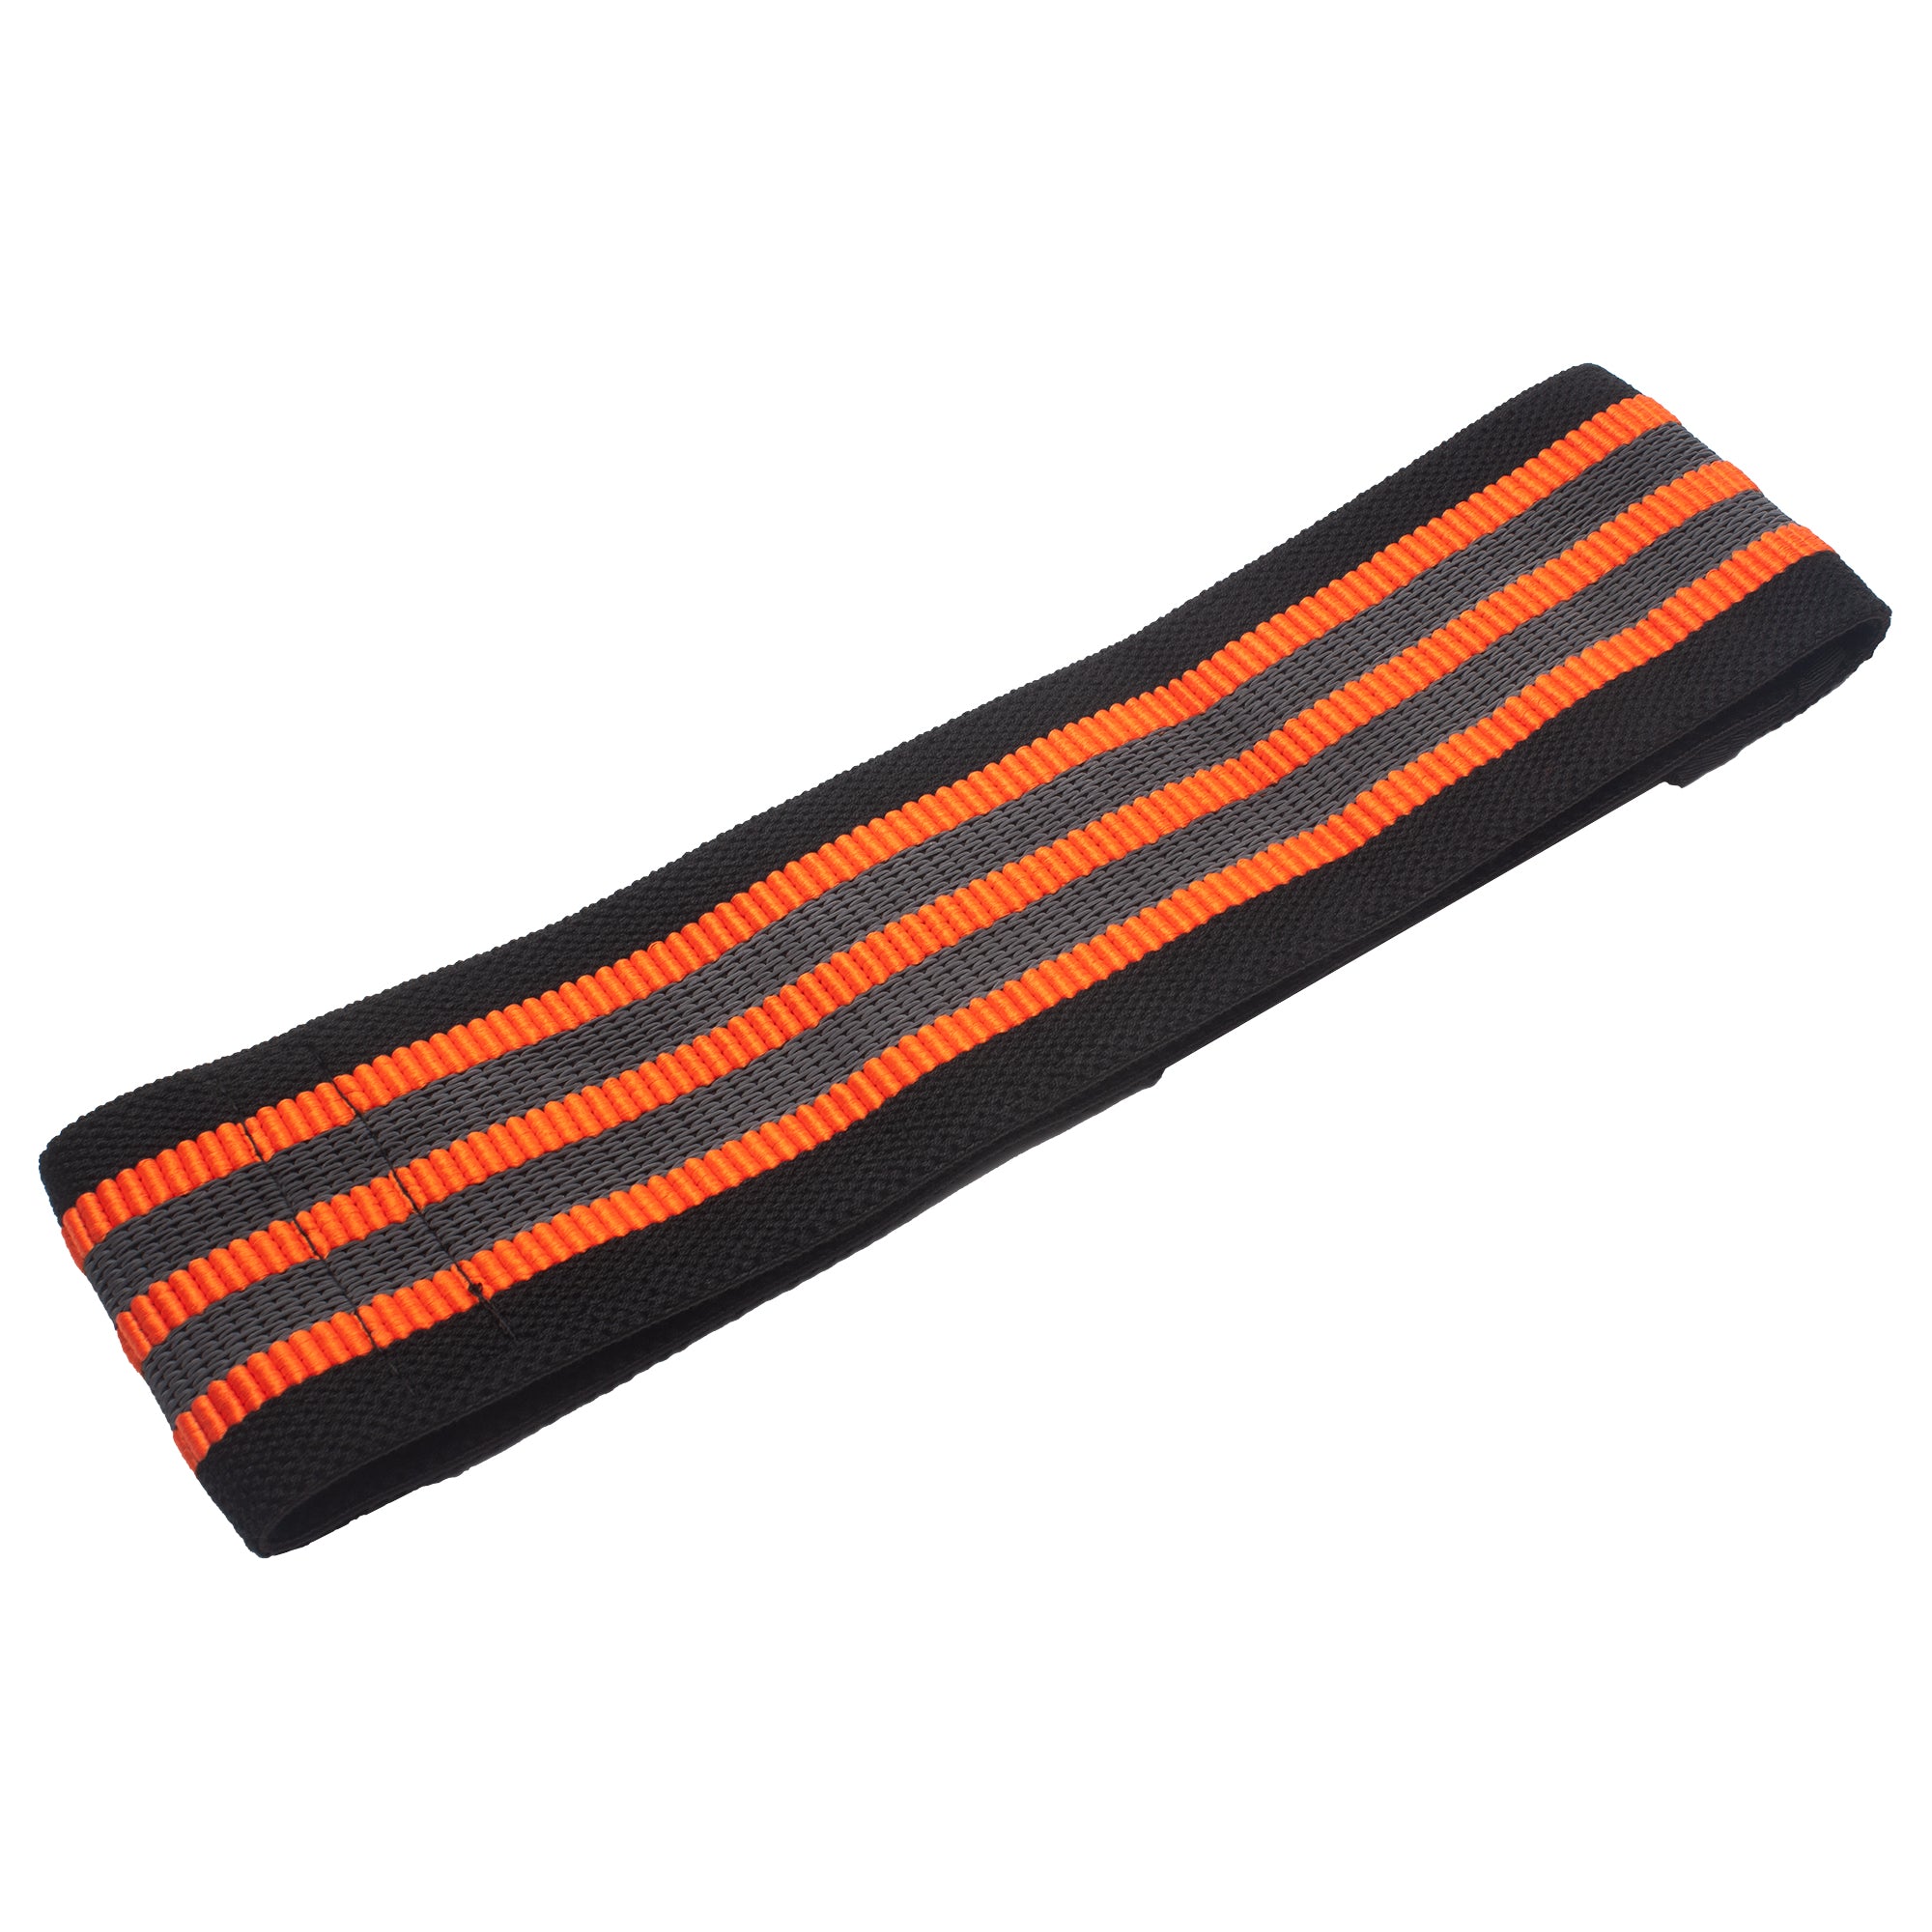 Fabric Non Slip Resistance Bands - 41 Inch